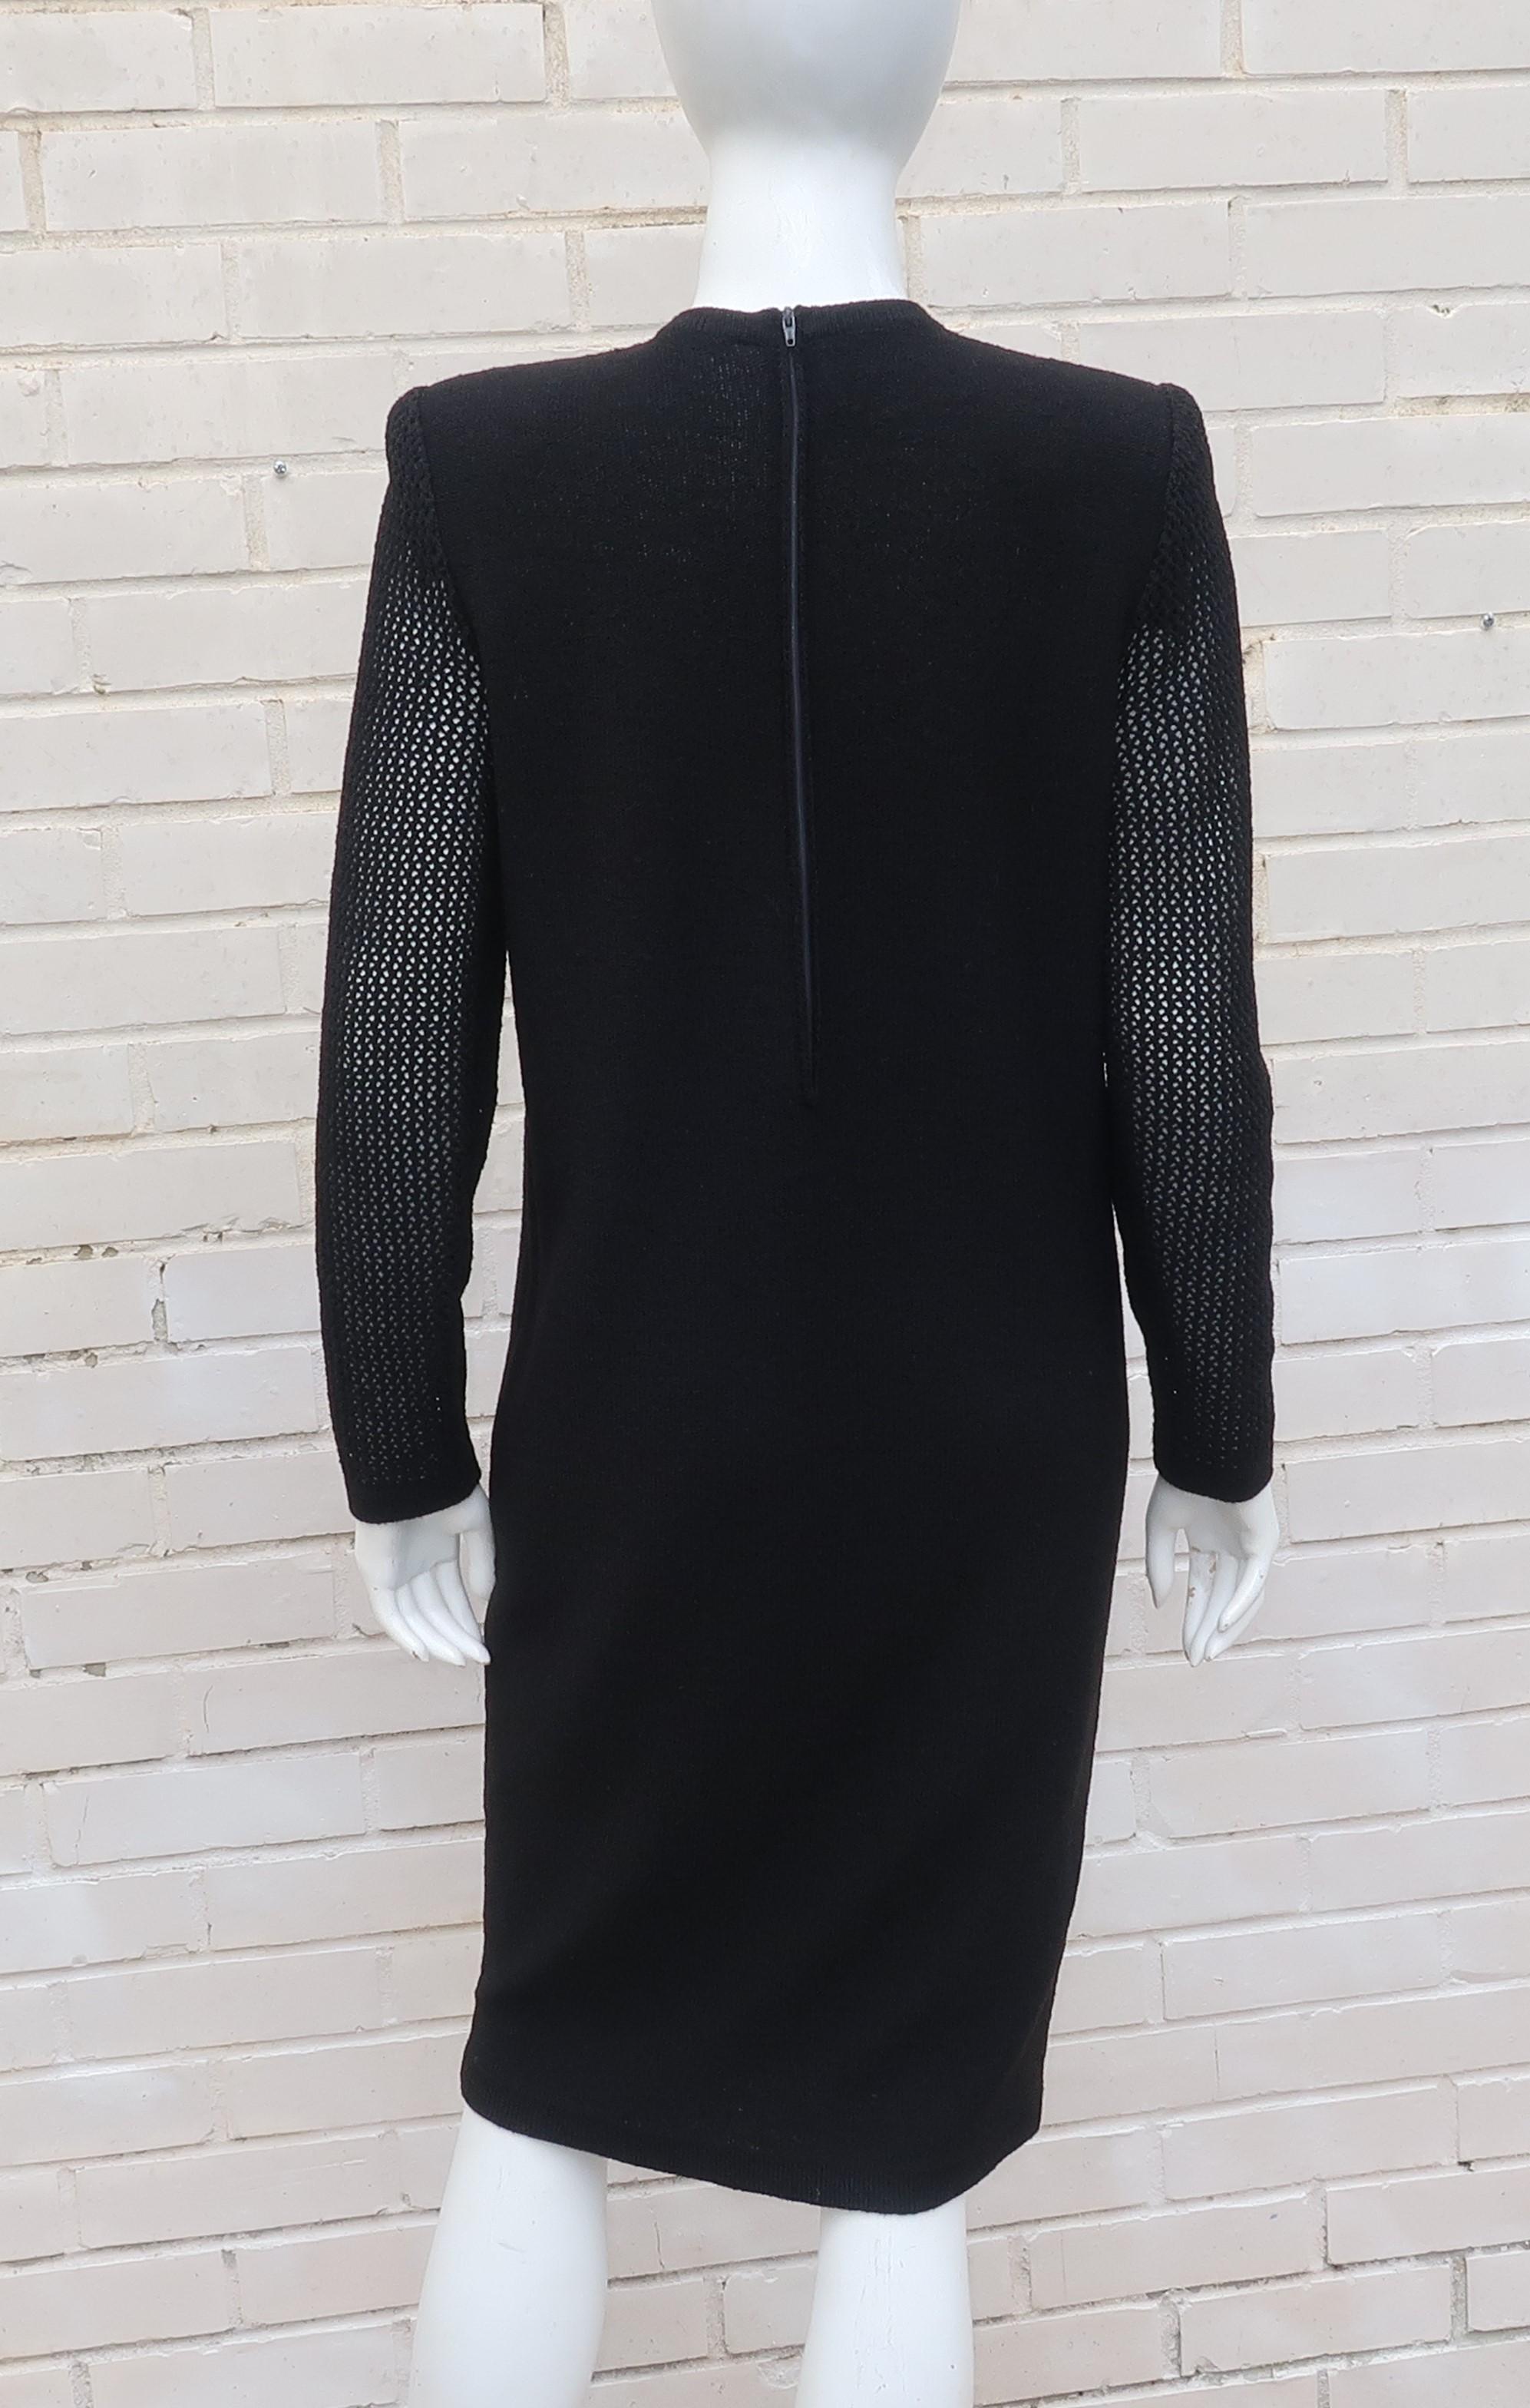 Scaasi 1980's Black Knit Dress With Large Gold Buttons 6